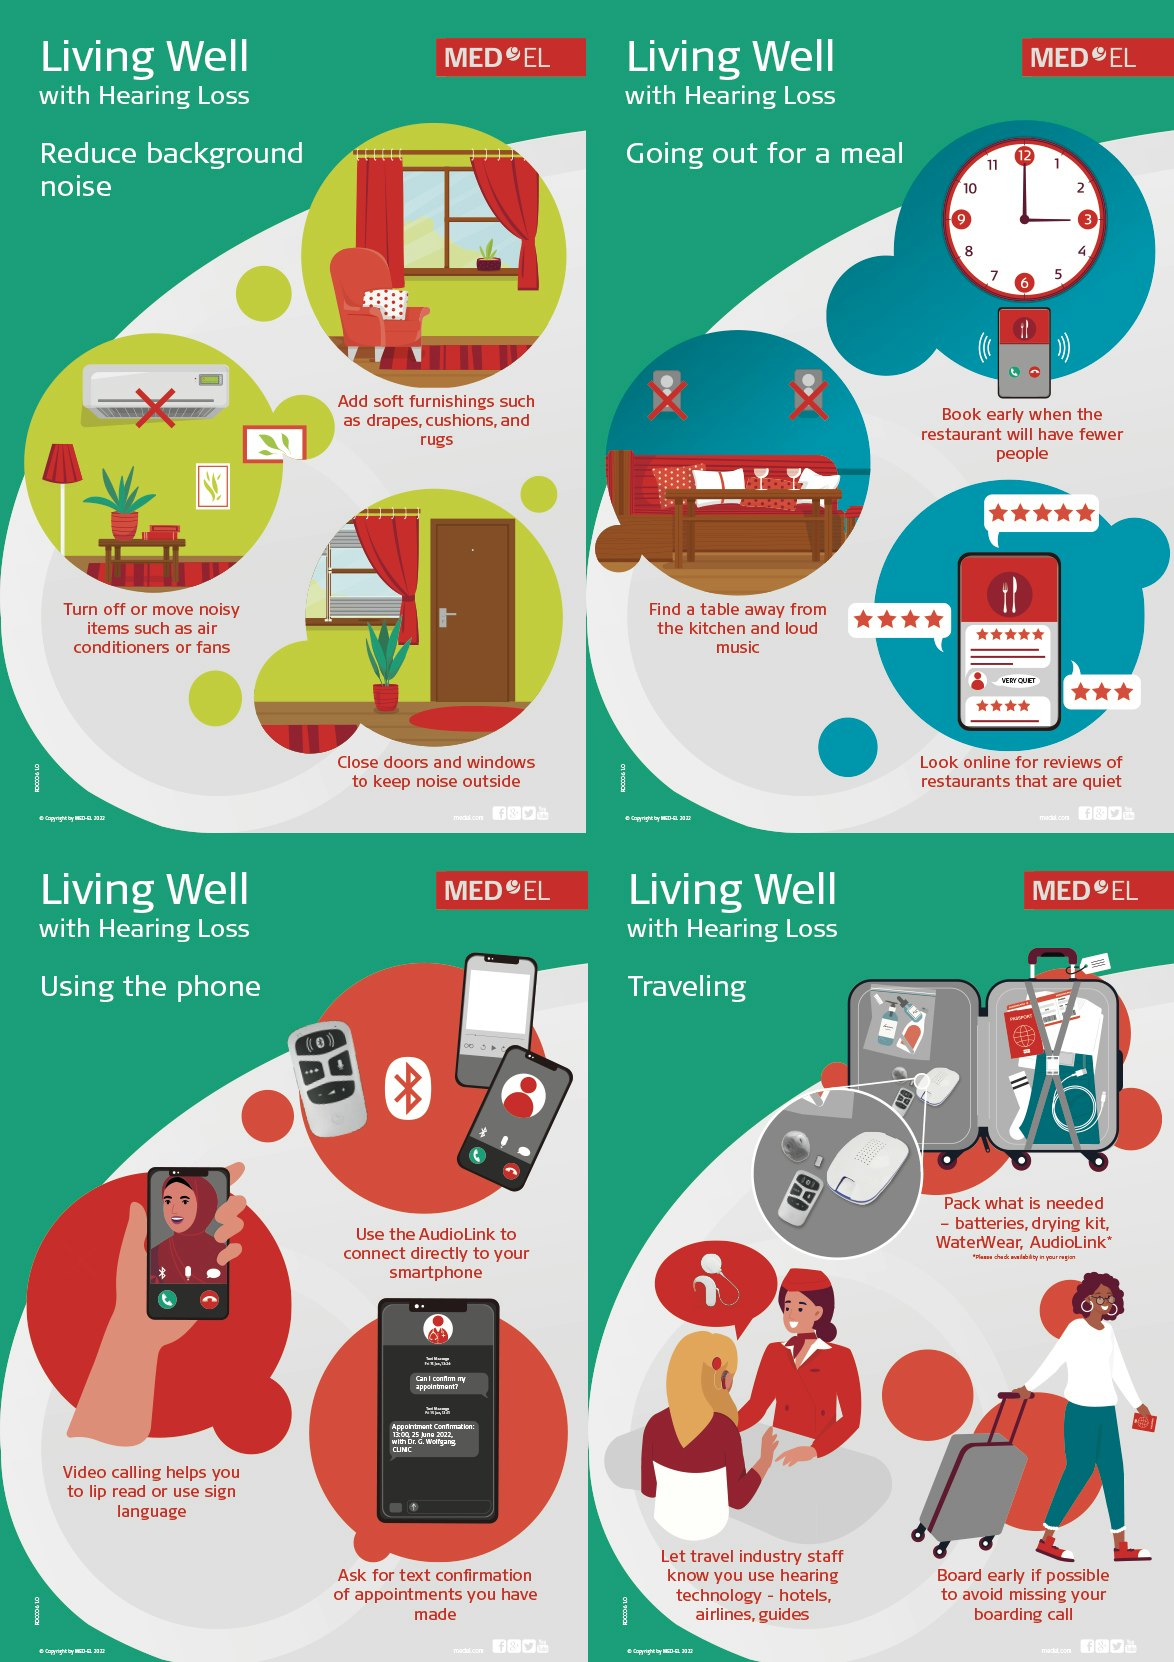 Hearing Posters-Hearing Posters_Living Well with Hearing Loss